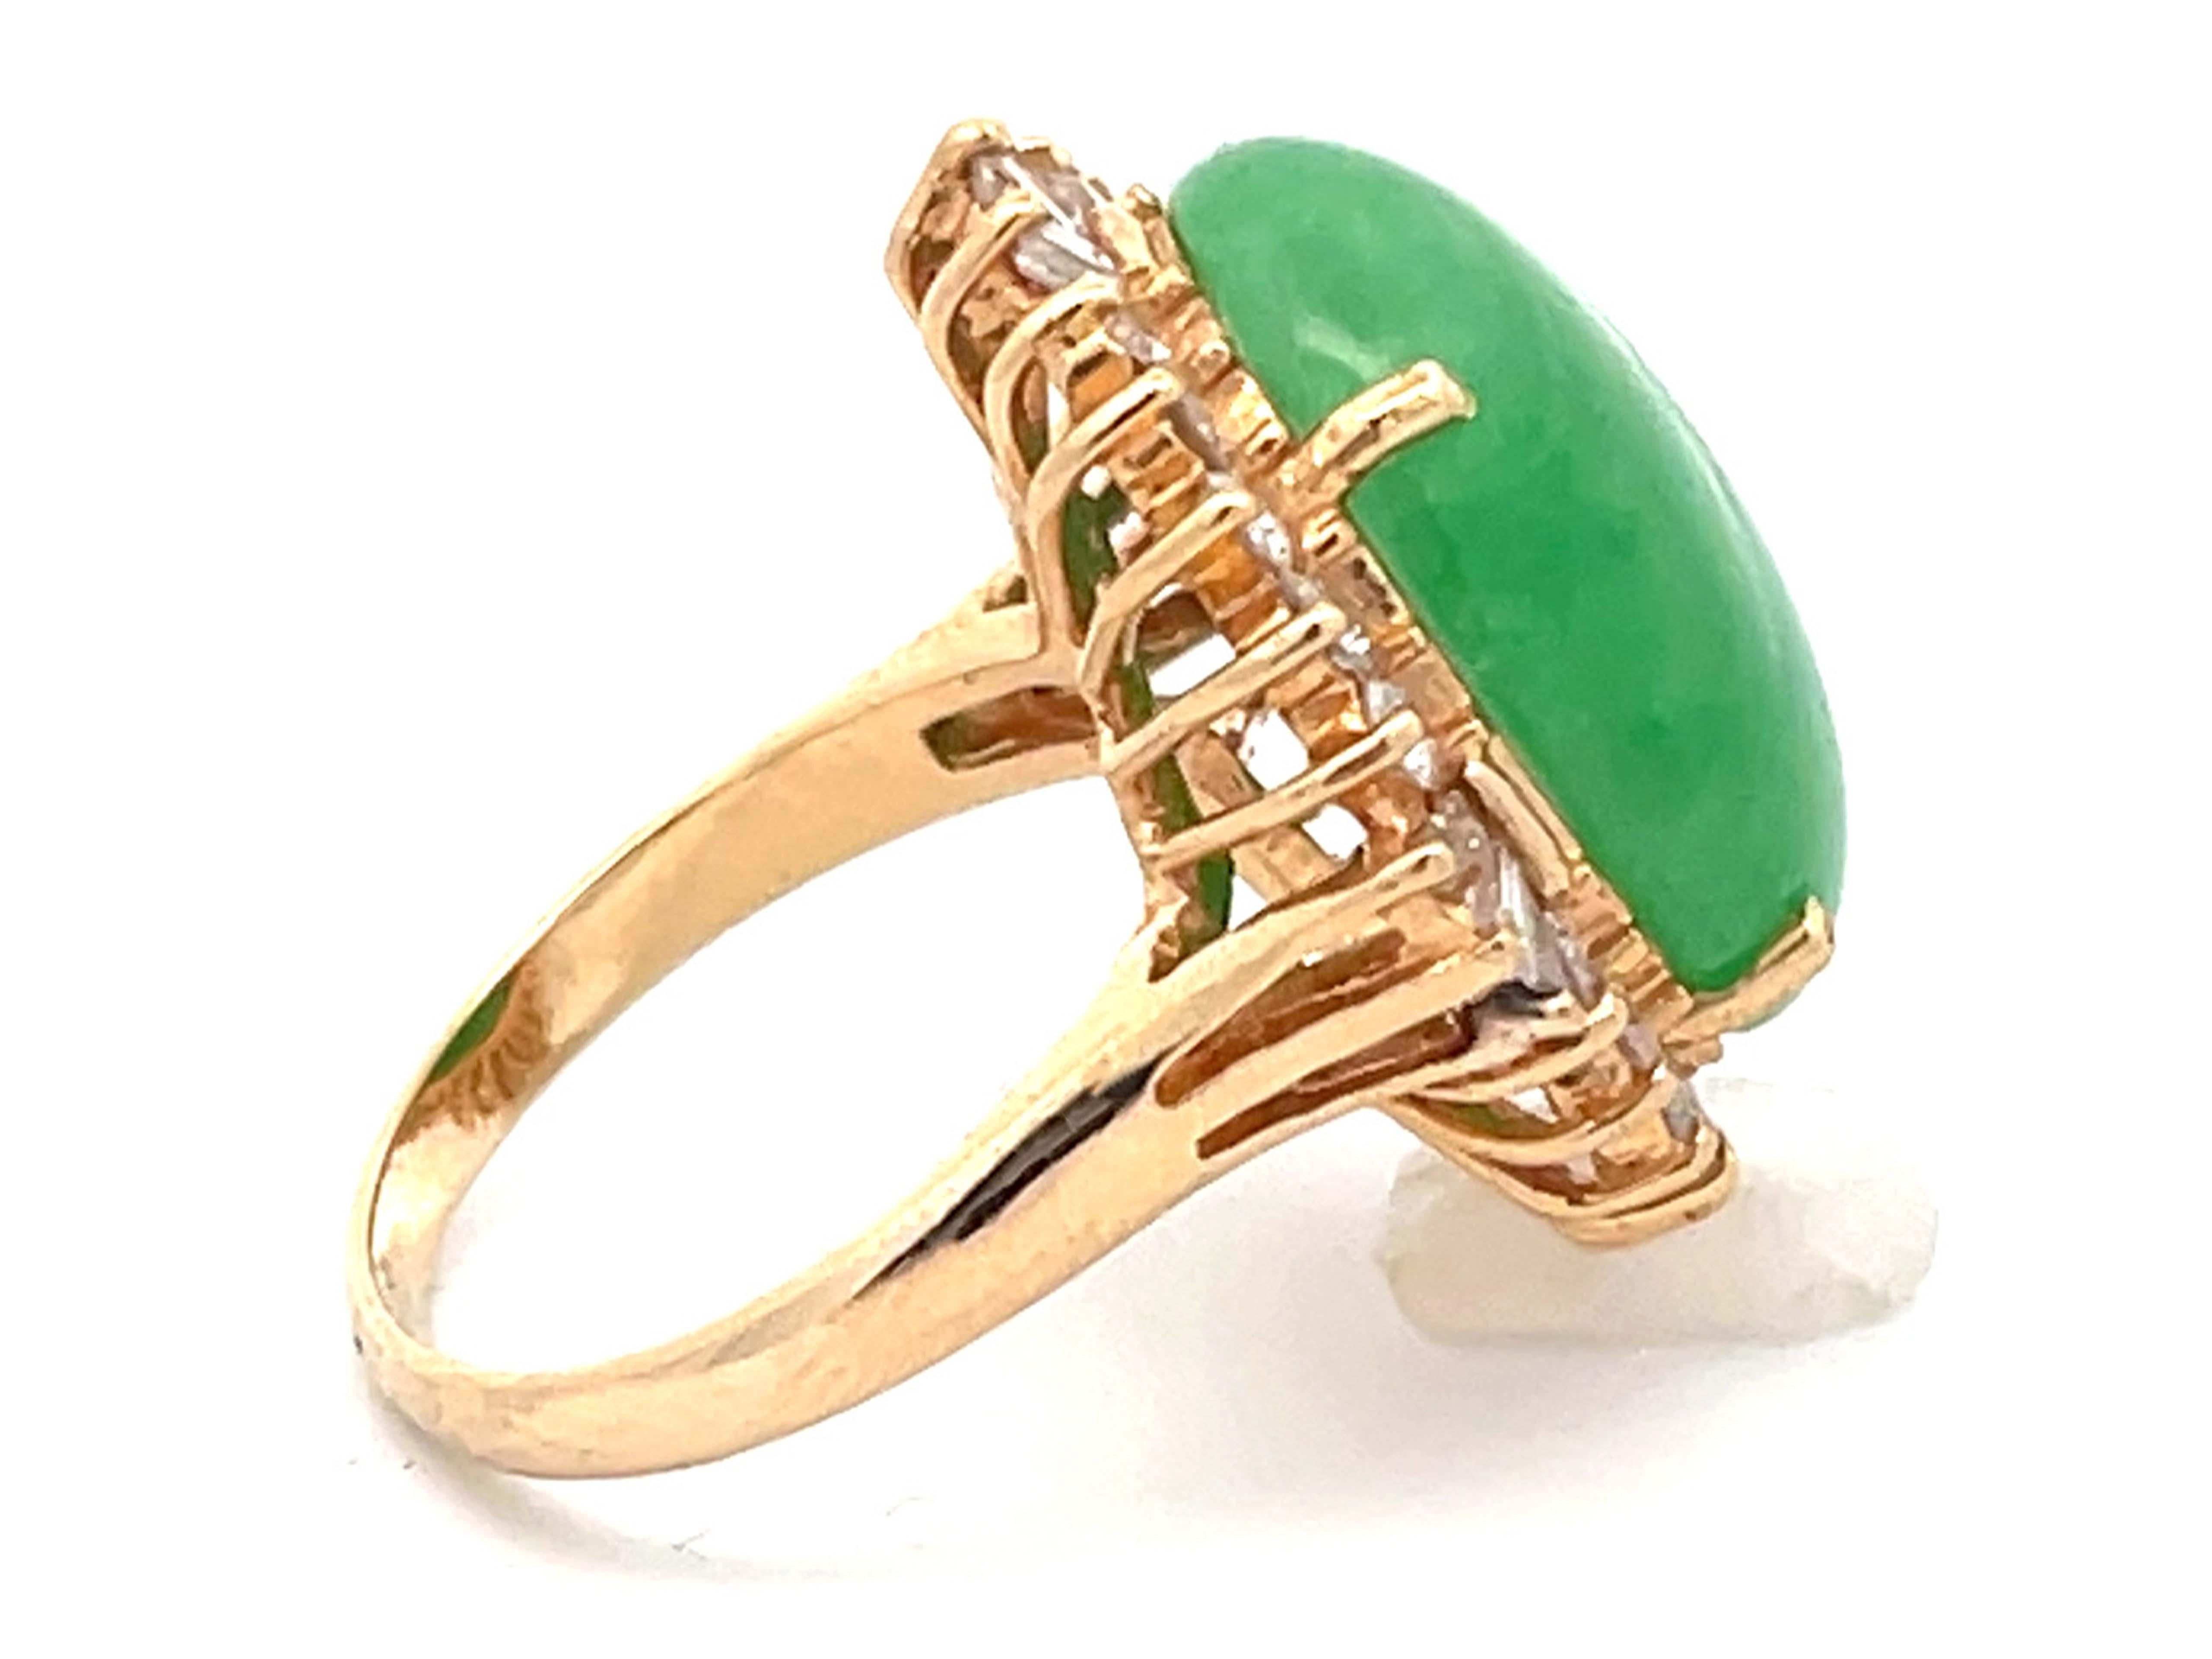 Diamond Halo Jade Ring in 18K Yellow Gold In Excellent Condition For Sale In Honolulu, HI